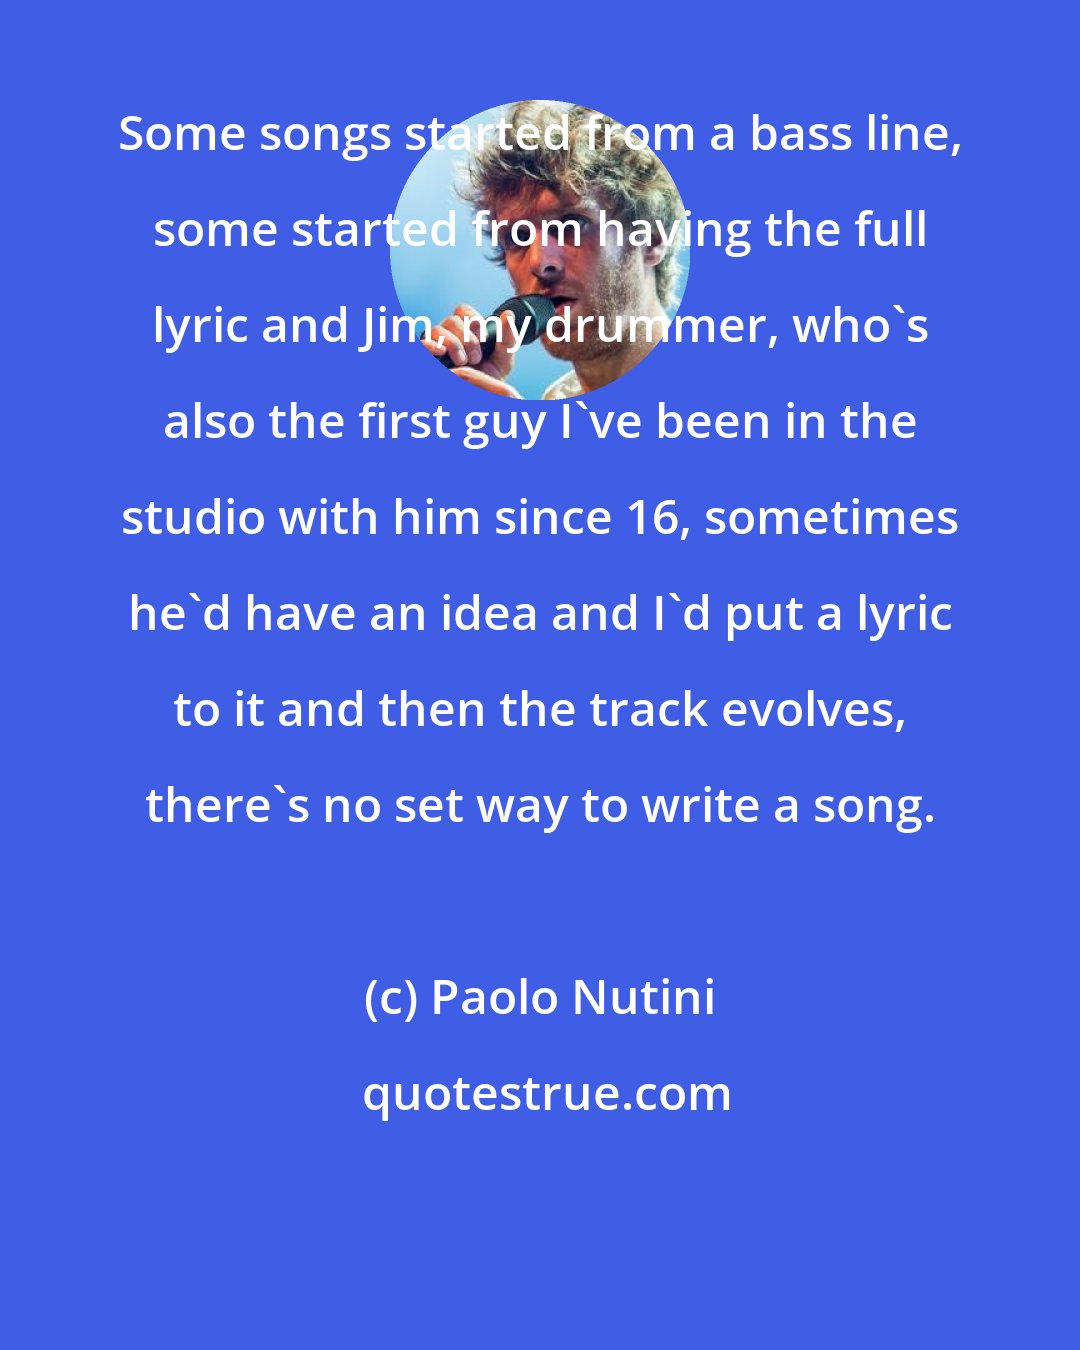 Paolo Nutini: Some songs started from a bass line, some started from having the full lyric and Jim, my drummer, who's also the first guy I've been in the studio with him since 16, sometimes he'd have an idea and I'd put a lyric to it and then the track evolves, there's no set way to write a song.